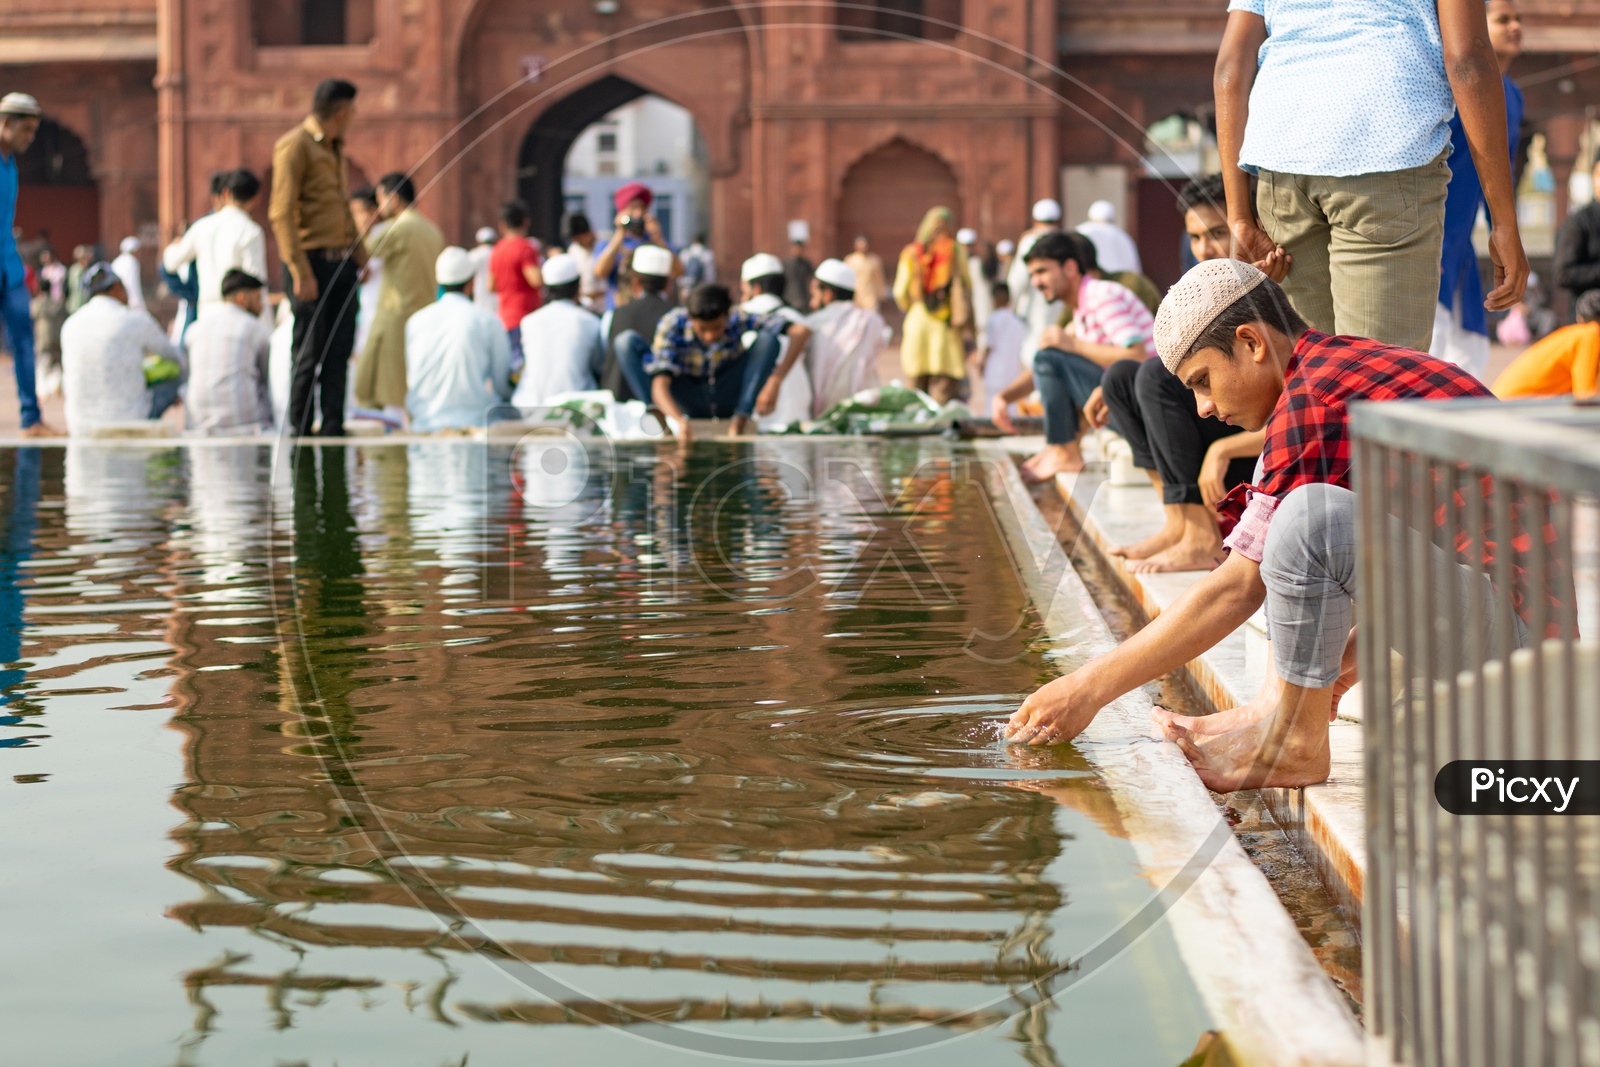 Man Performing 'Wudu' on the day of Eid-ul-Fitr (End of the holy month of Ramadan) at Jama Masjid, Delhi